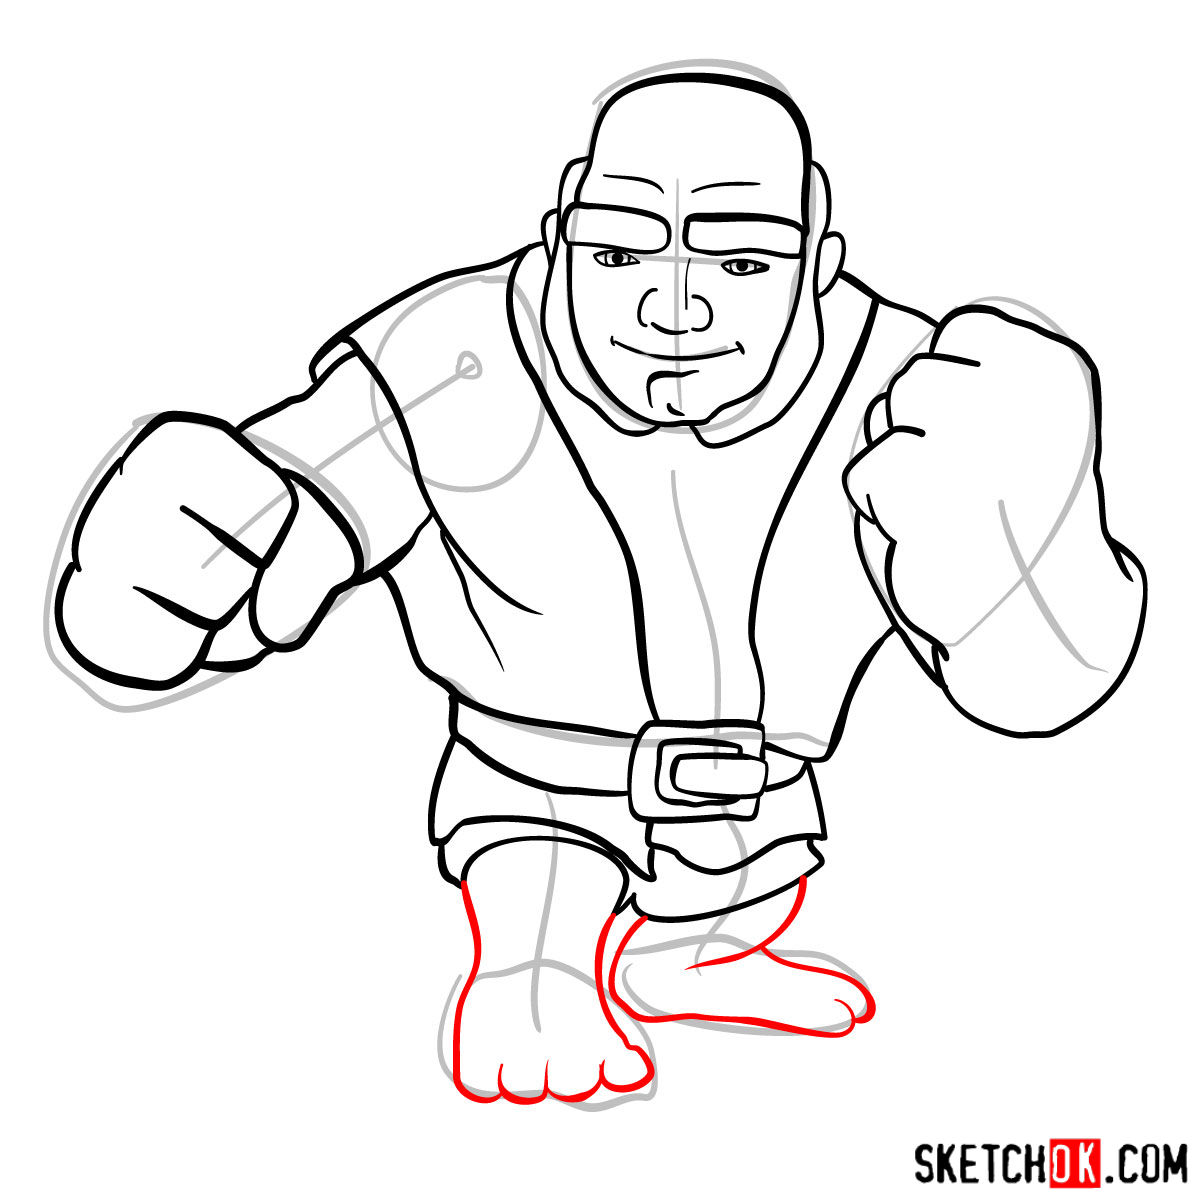 How to draw Giant from Clash of Clans - step 09